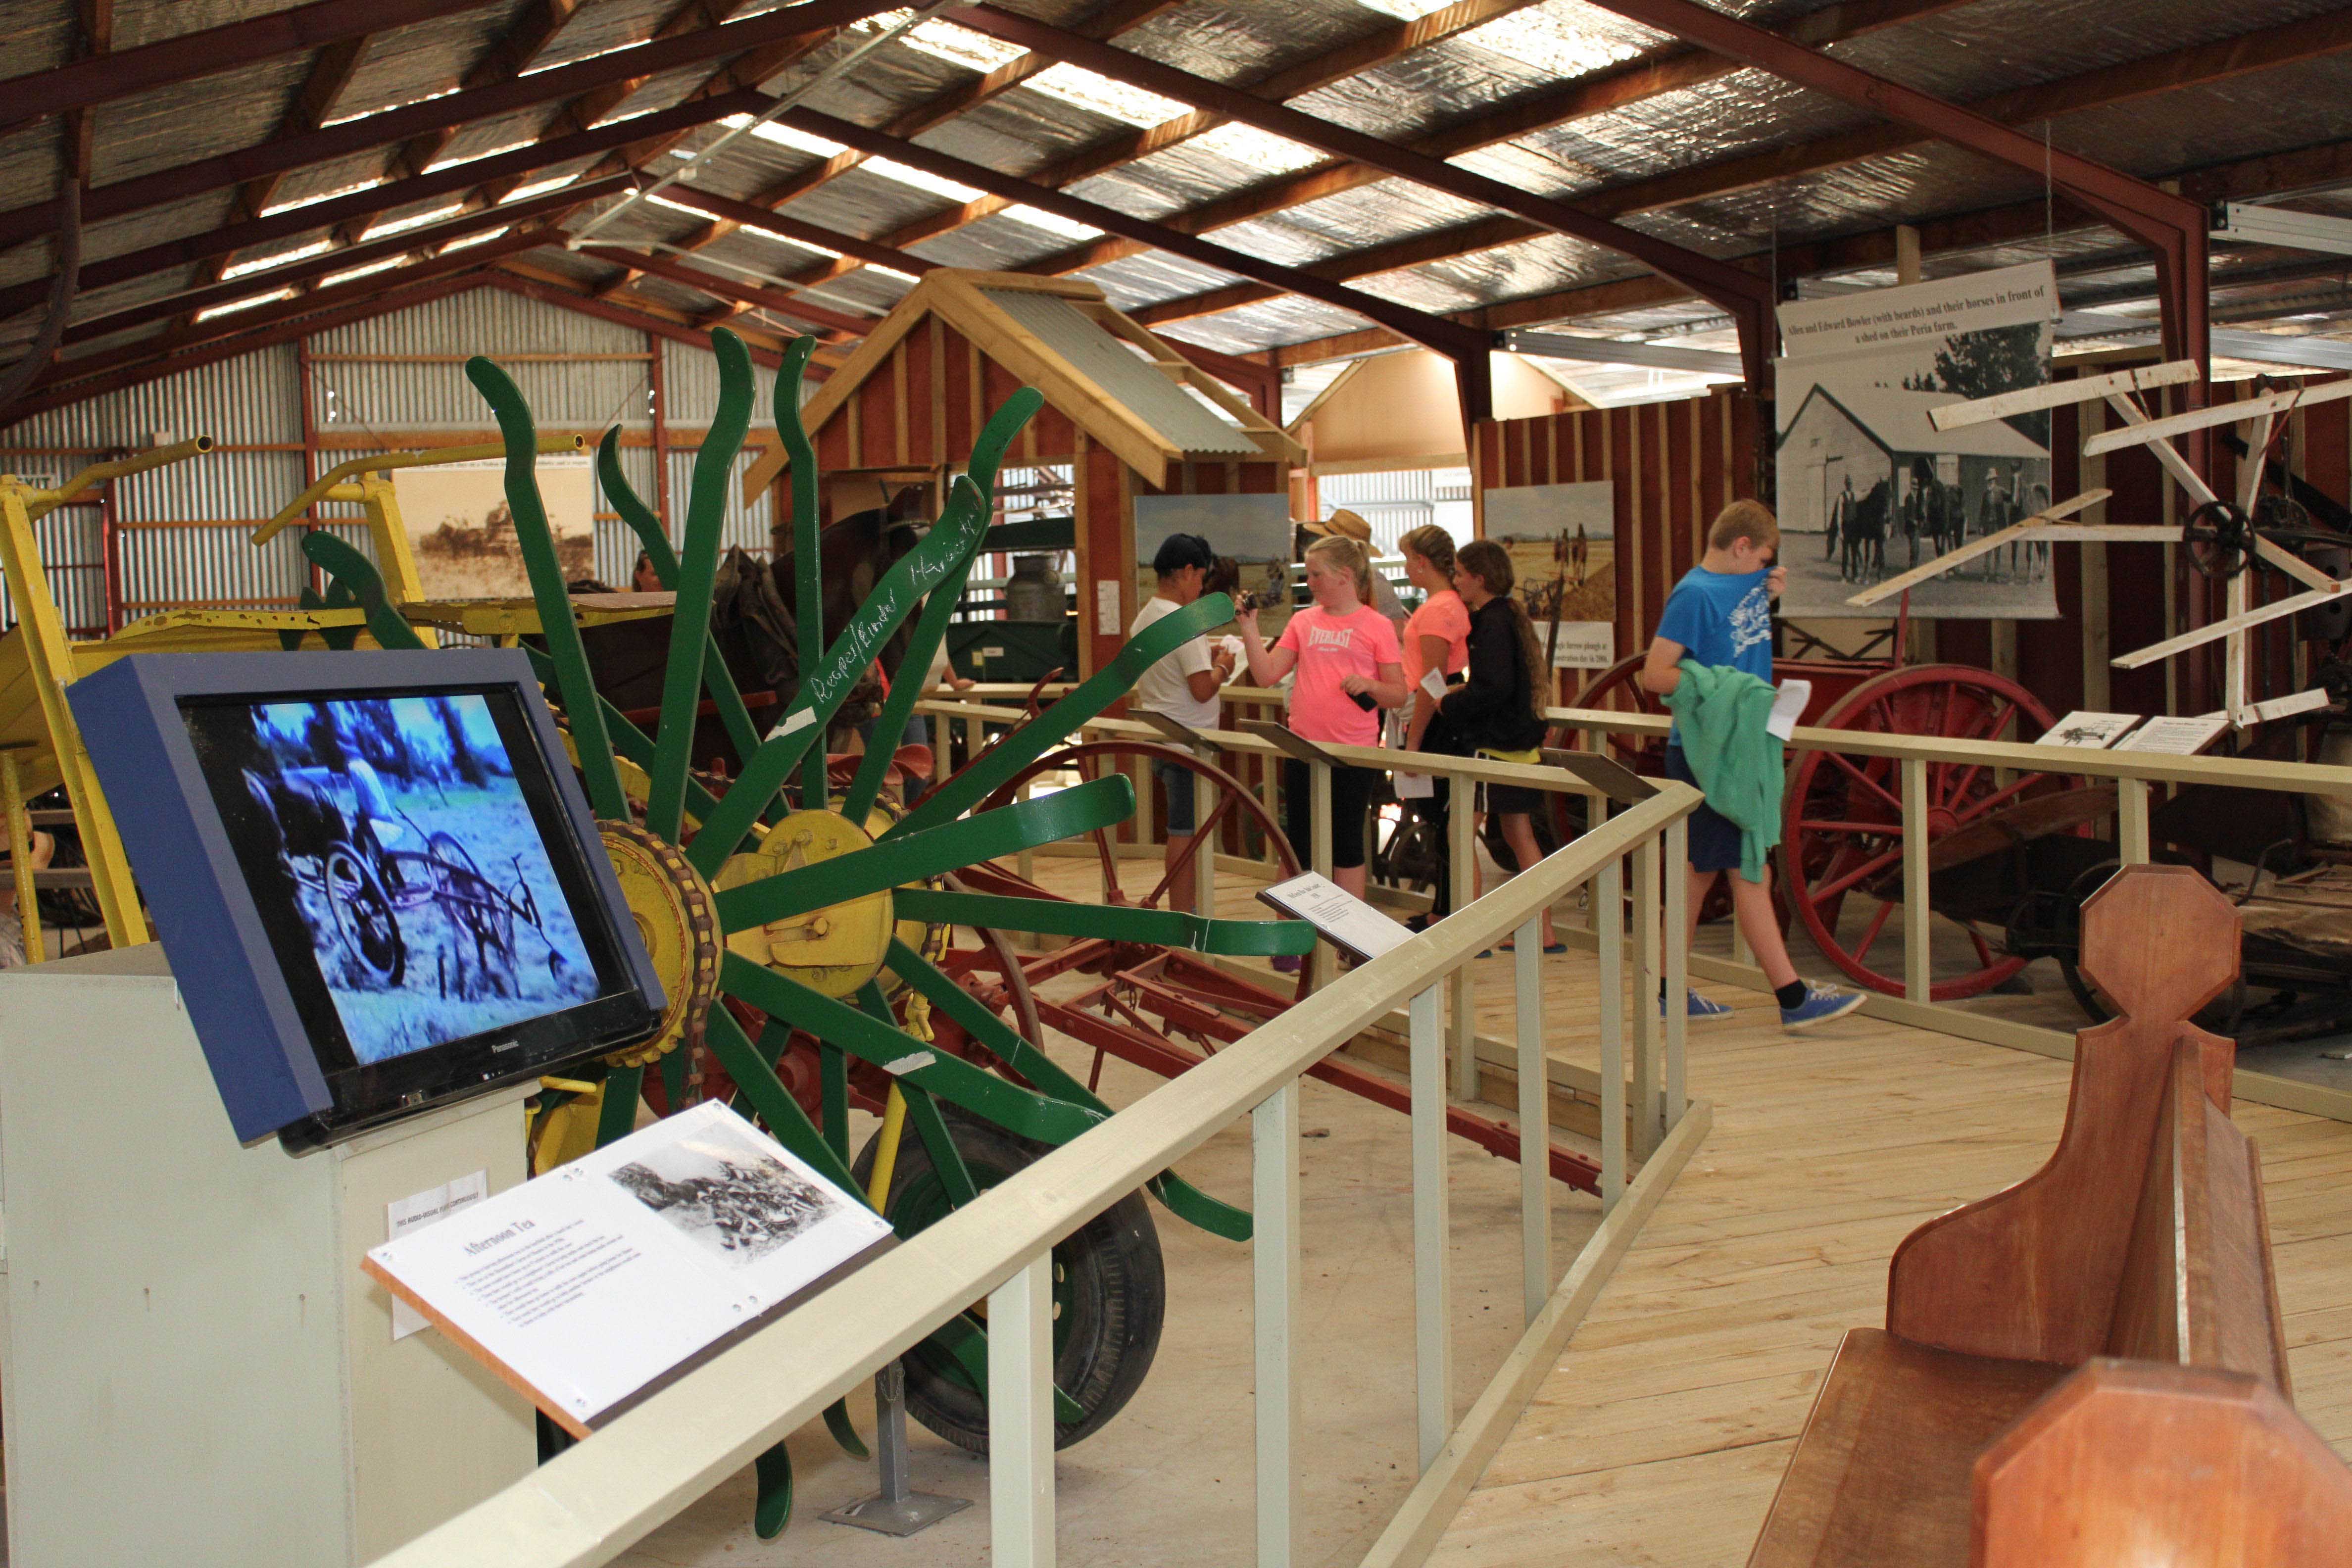 Group of visitors to the Museum viewing articles inside a large barn